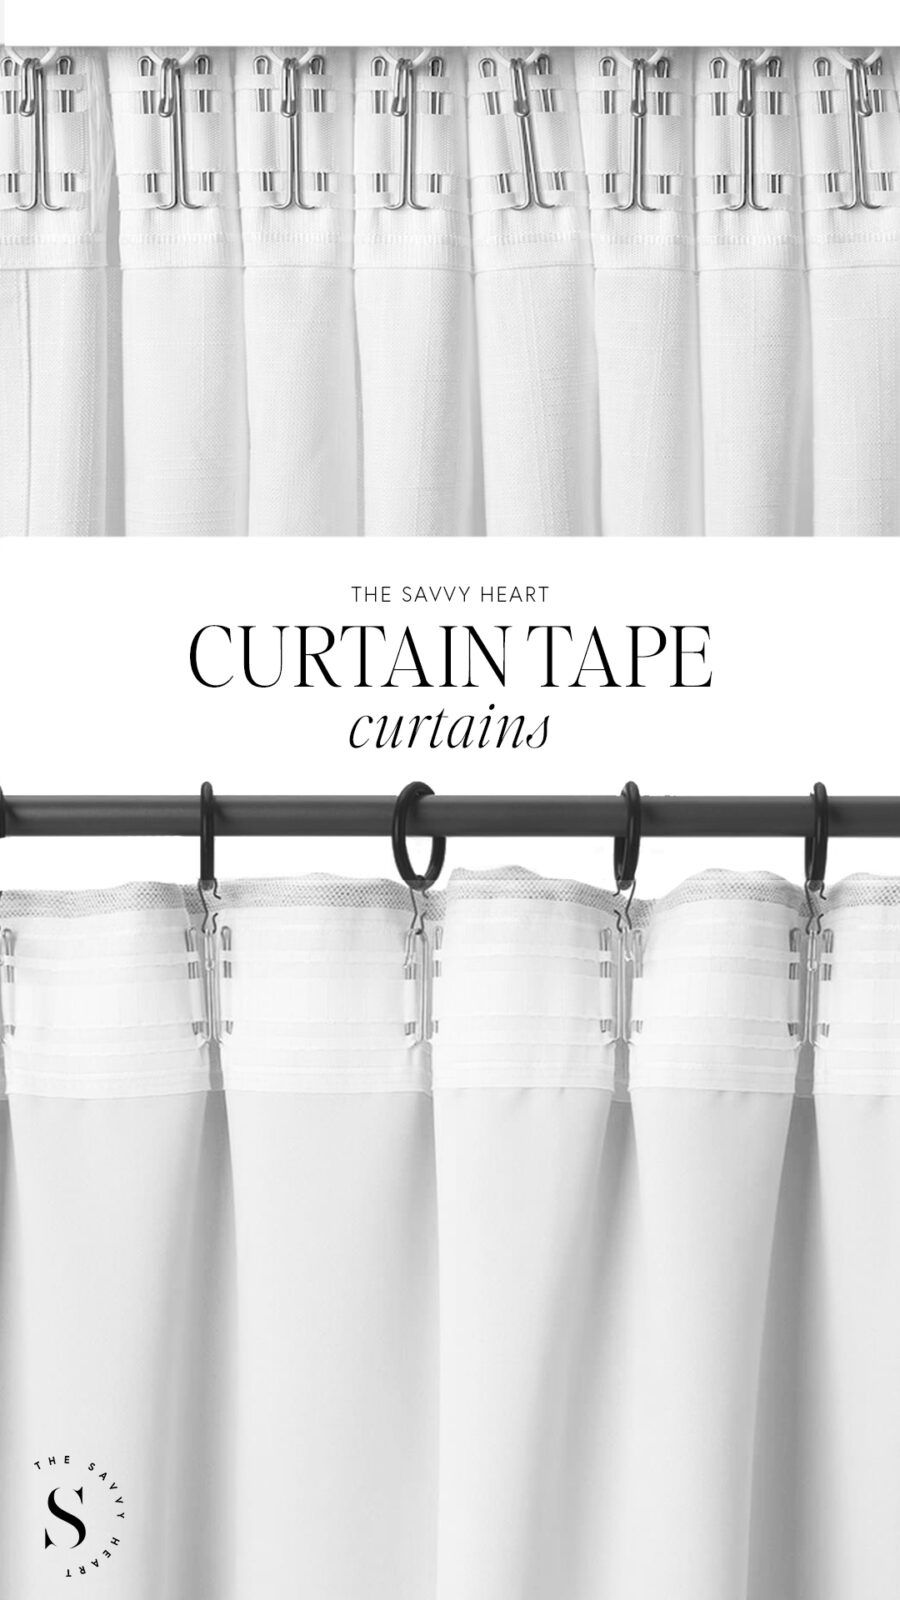 Different Drapery & Curtain Styles: What Types To Buy And Which Ones To Avoid - Curtain and drapery tape